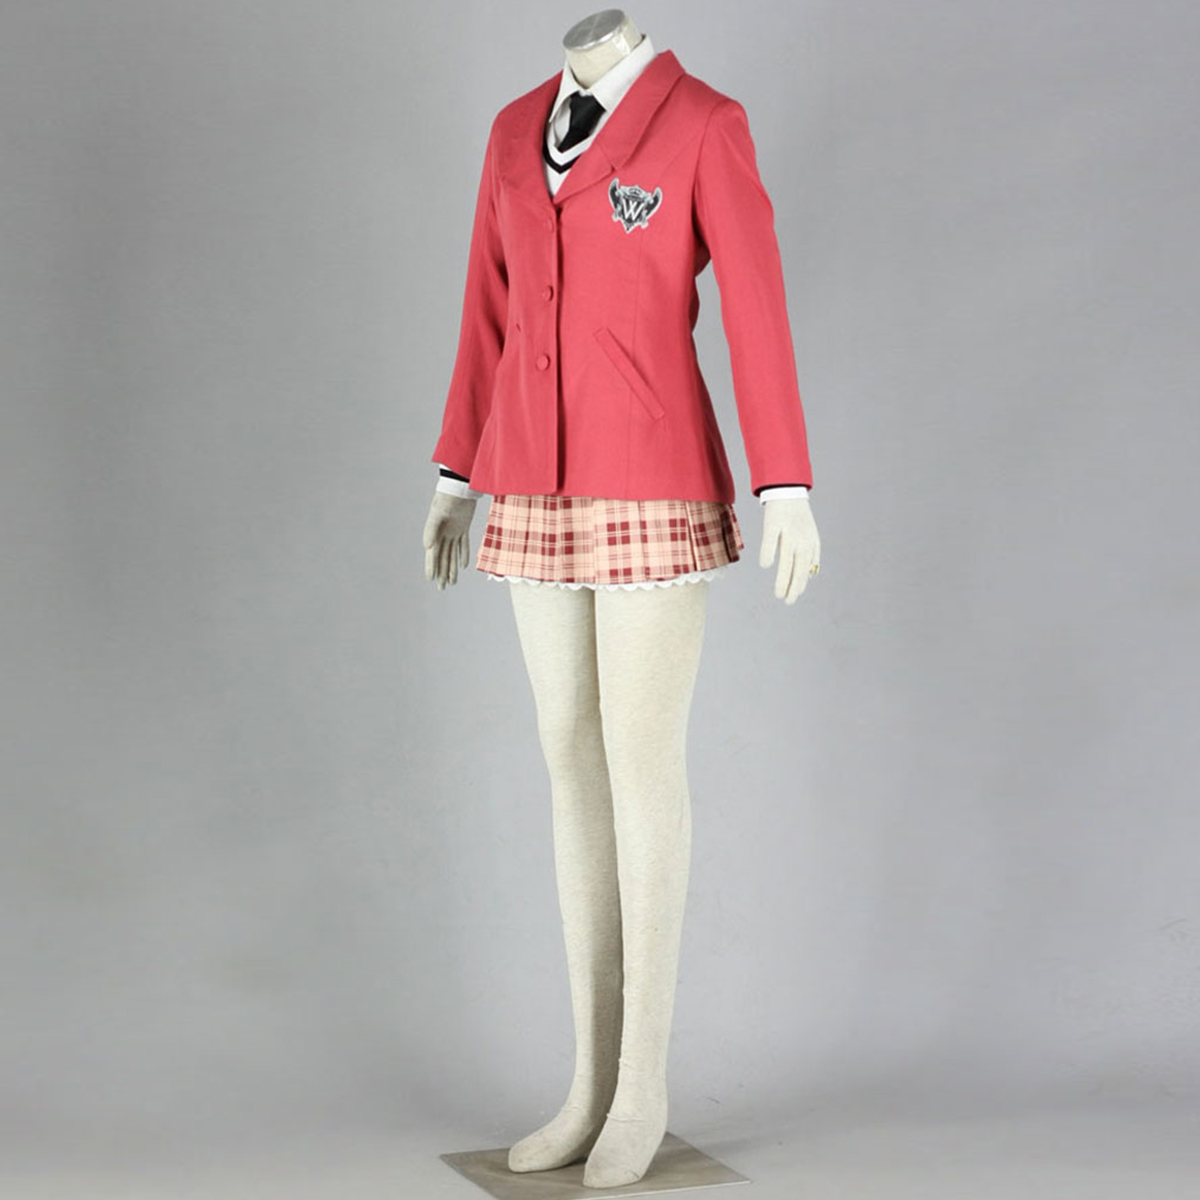 Axis Powers Hetalia Winter Female School Uniform 1 Anime Cosplay Costumes Outfit